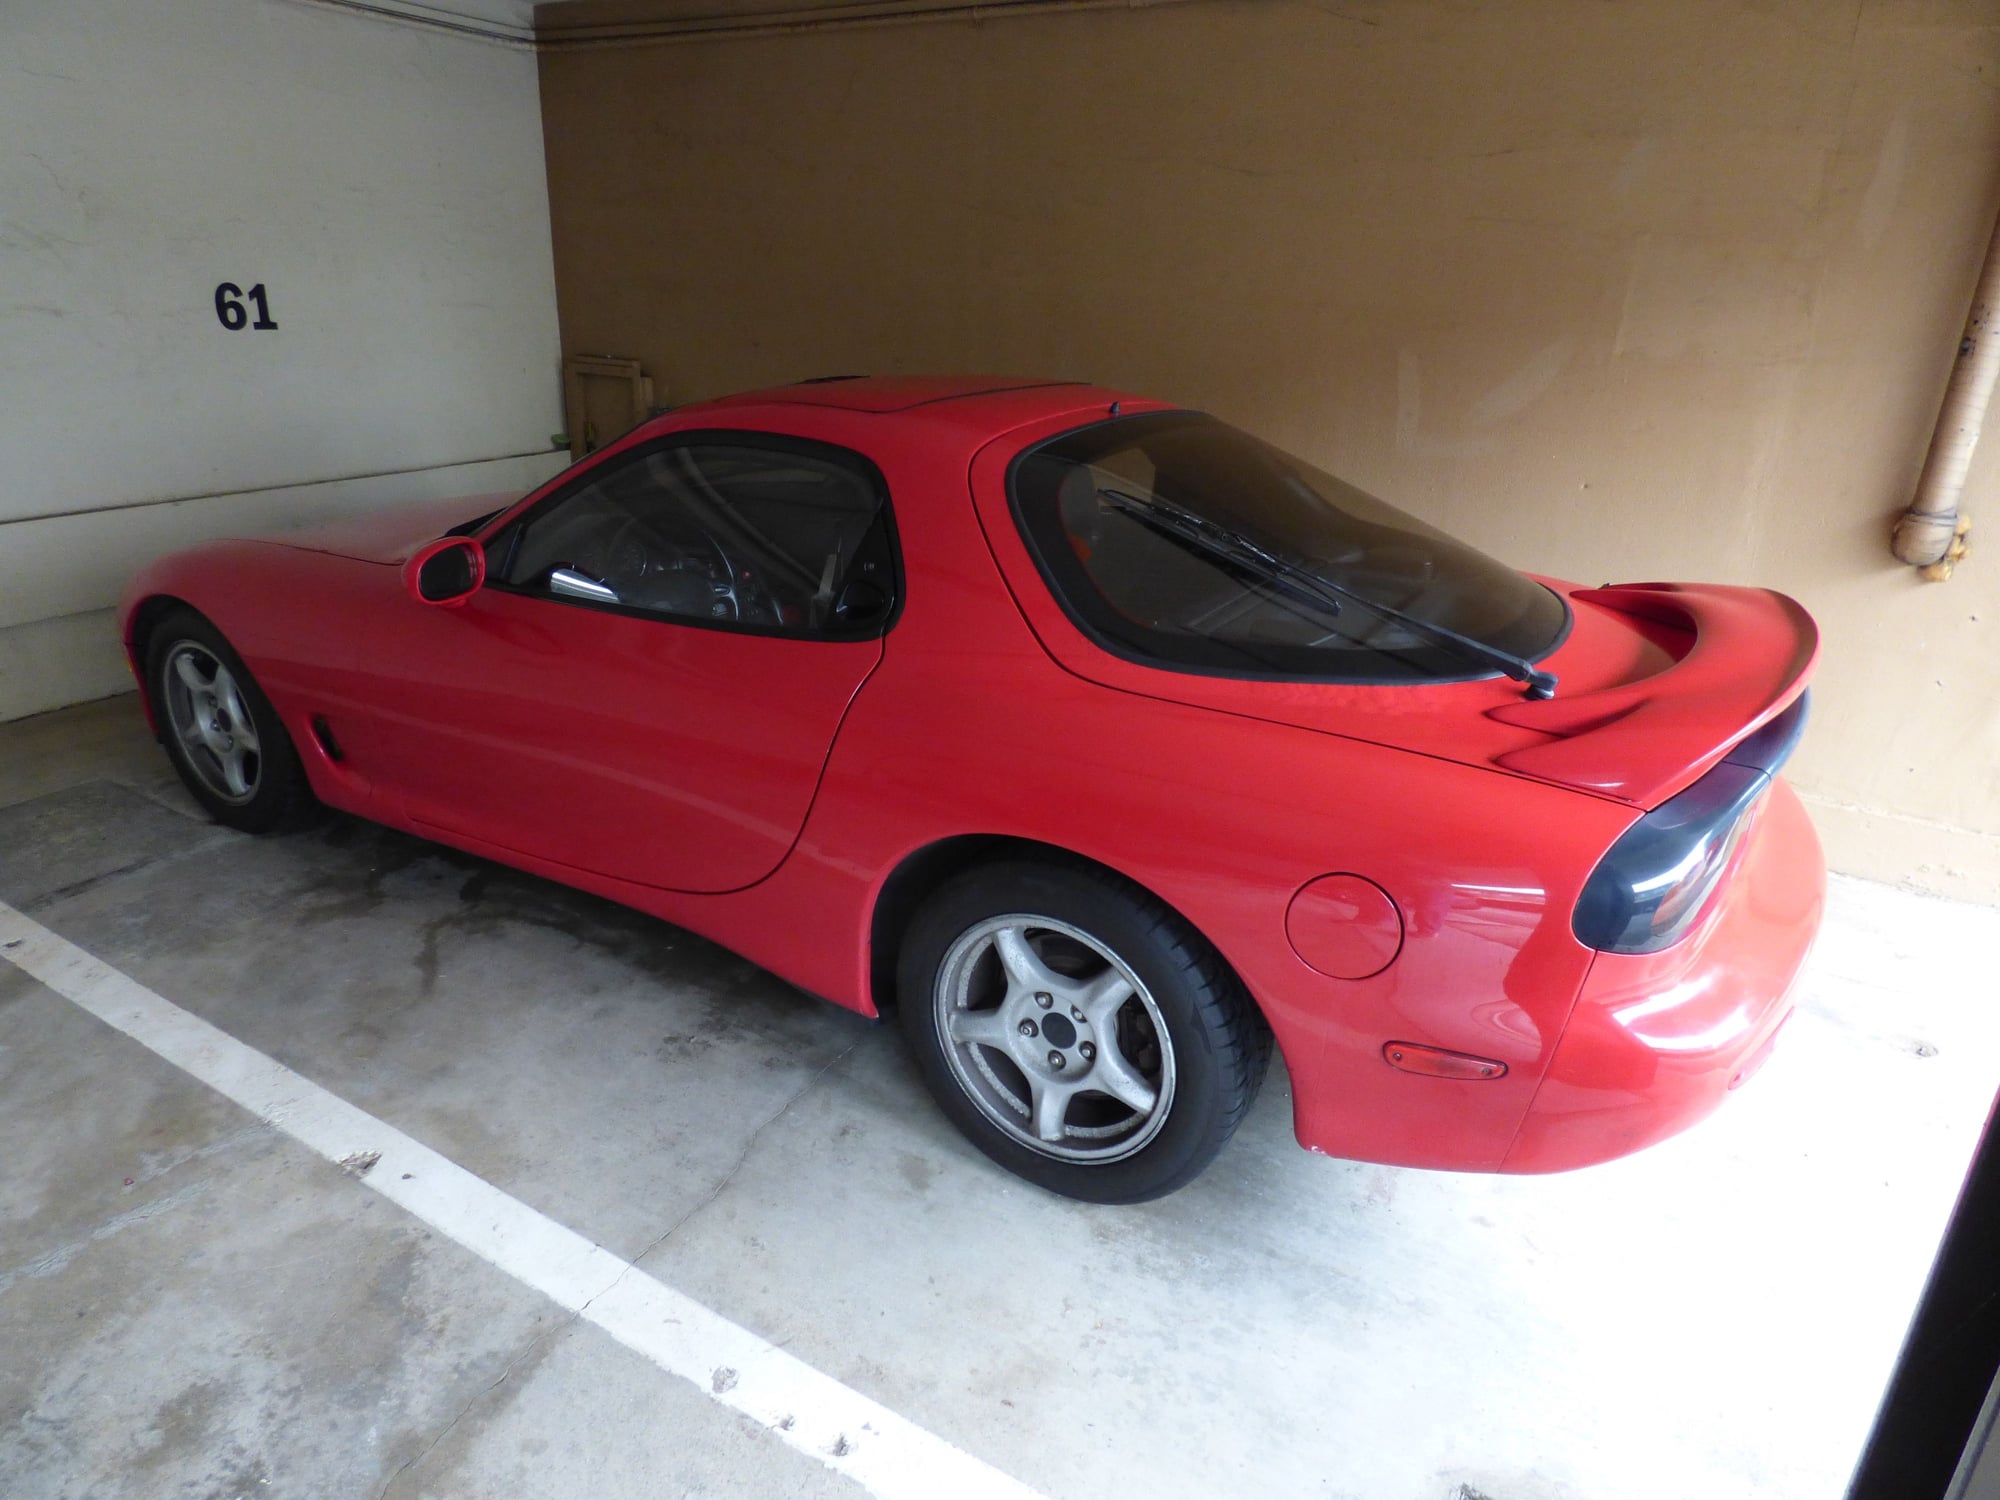 1993 Mazda RX-7 - One owner Touring model. - Used - VIN JM1FD3310P0202657 - 251,000 Miles - 2WD - Automatic - Coupe - Red - Pacifica, CA 94044, United States